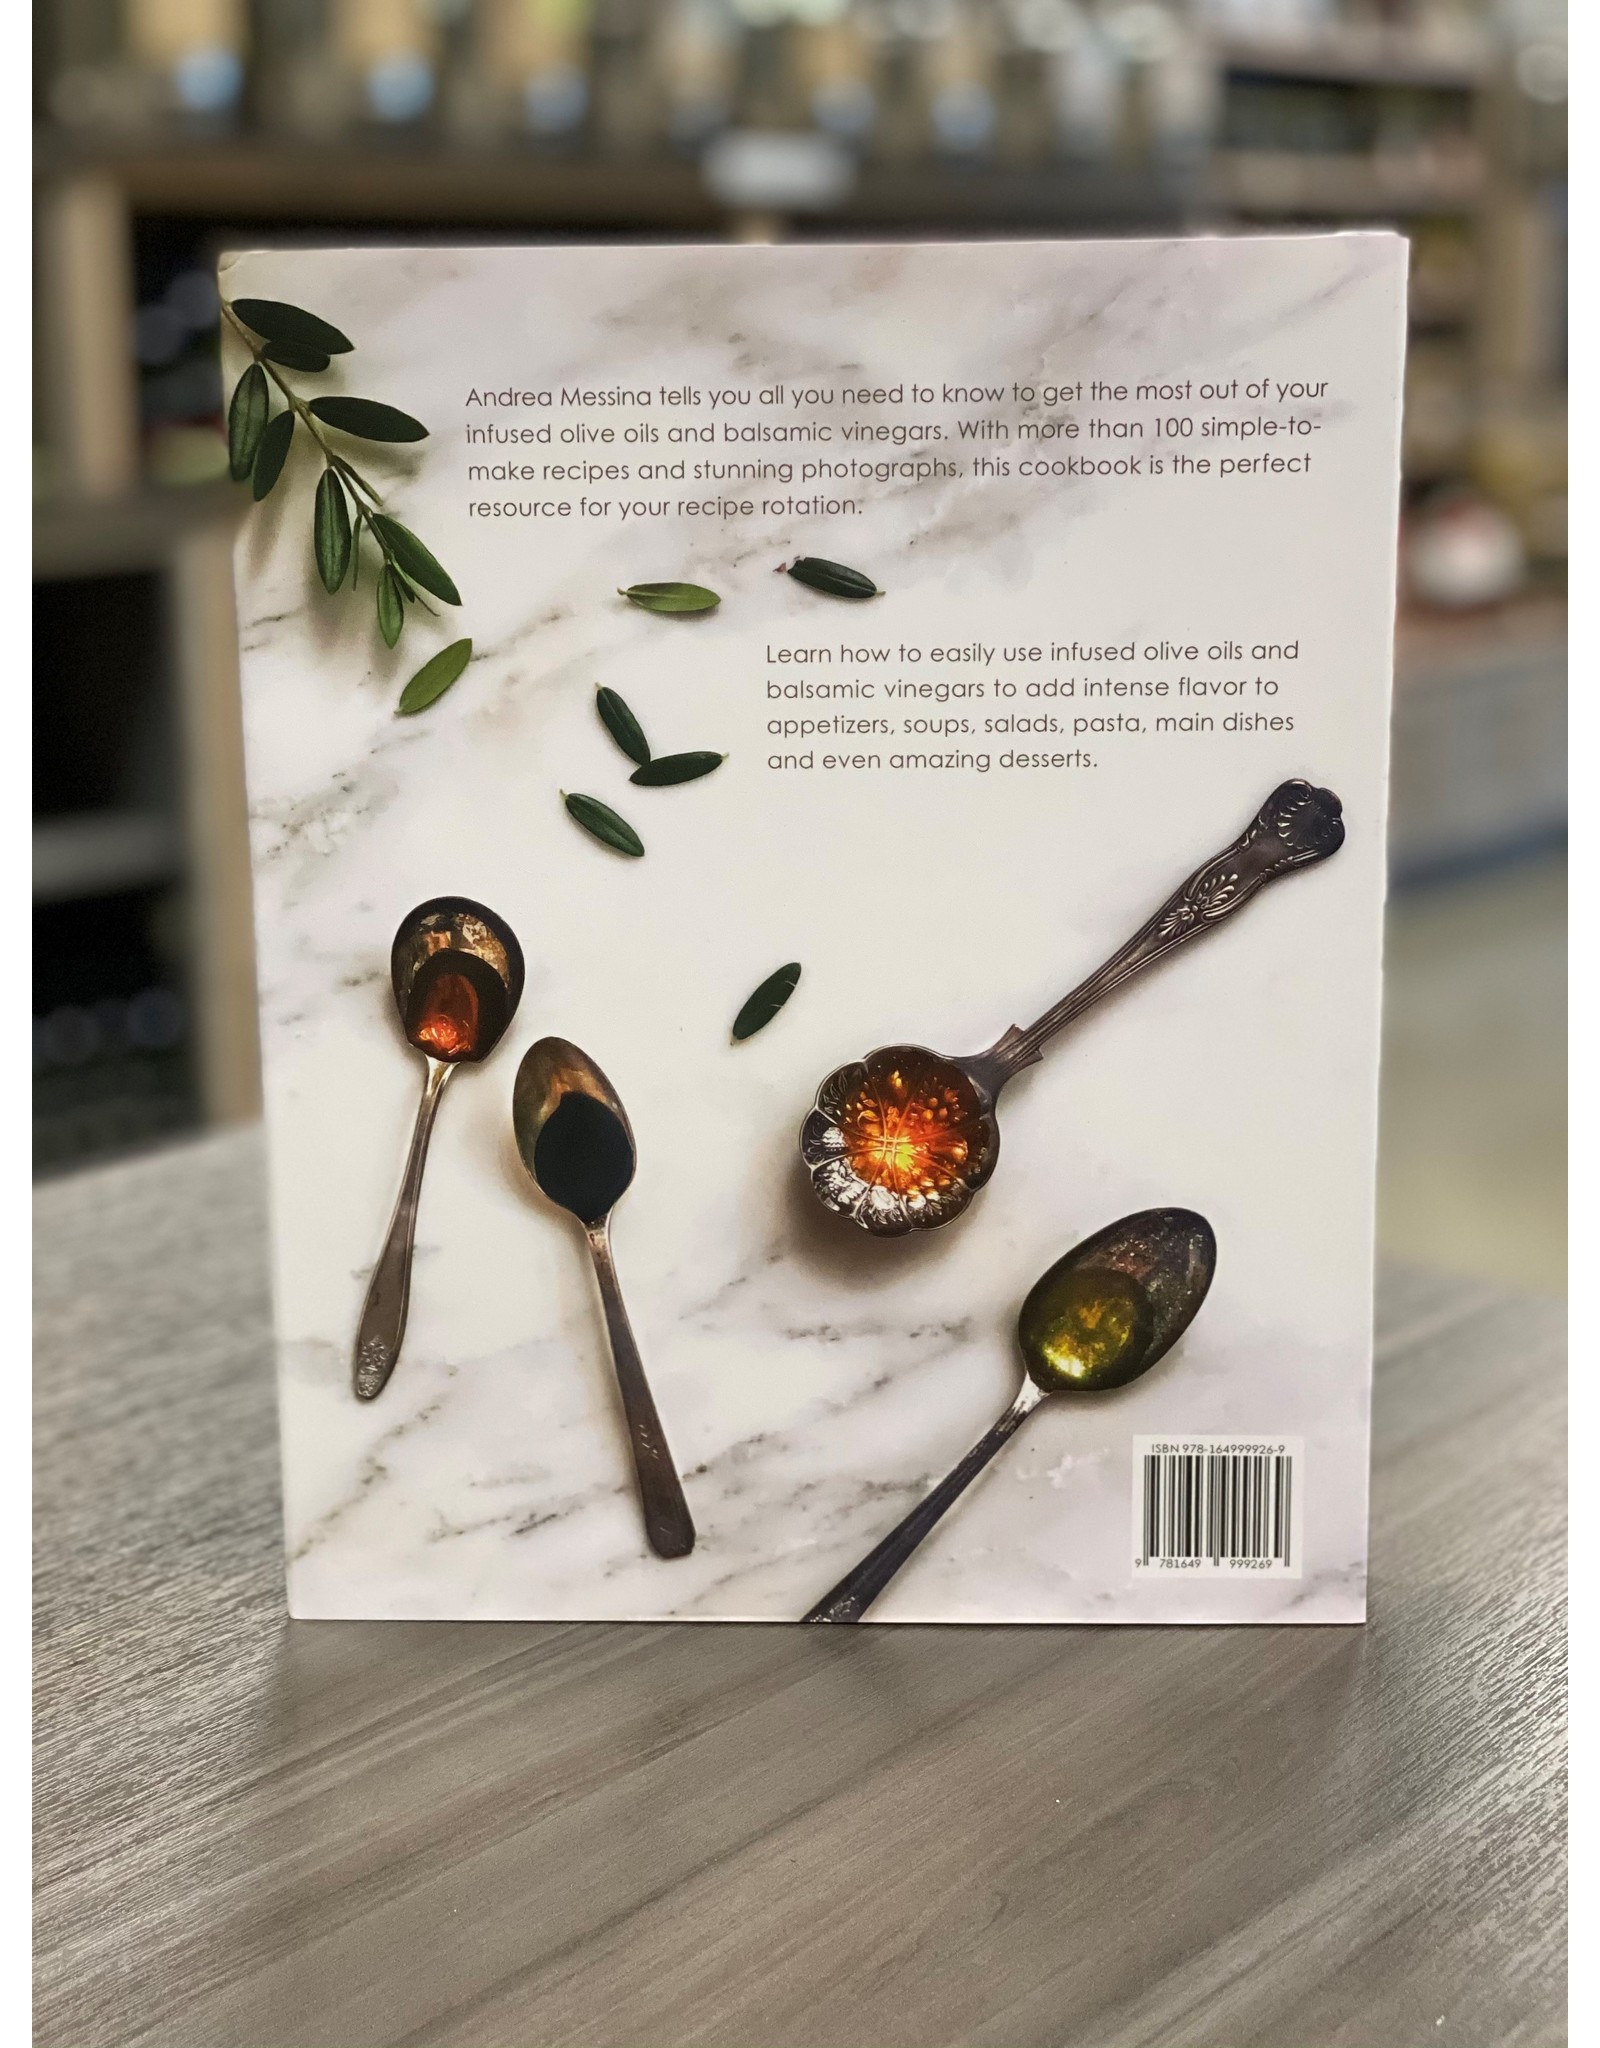 At the Table Cookbook